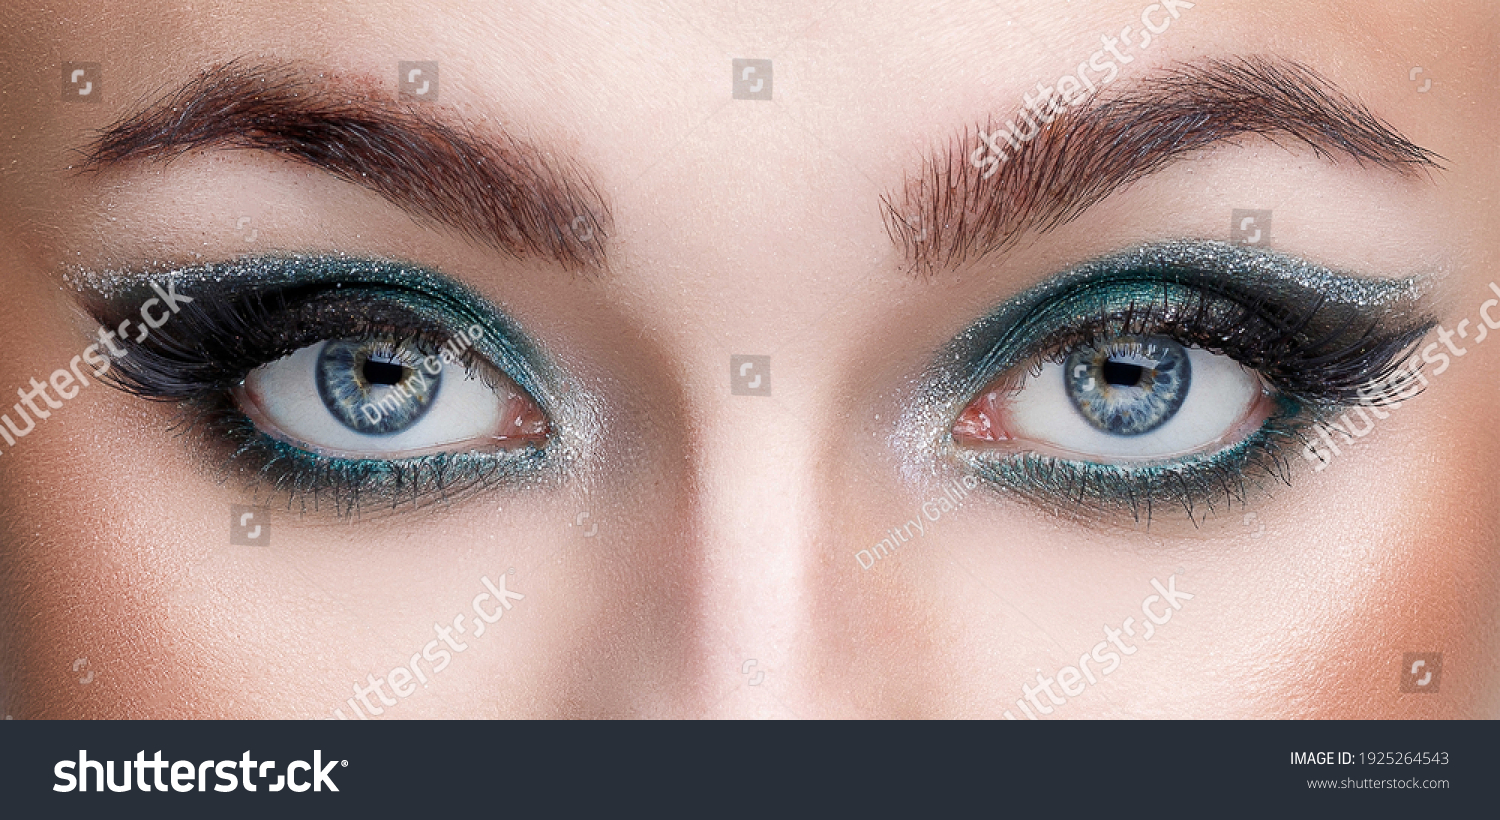 Close-up view of the eyes of a young girl with beautiful makeup #1925264543